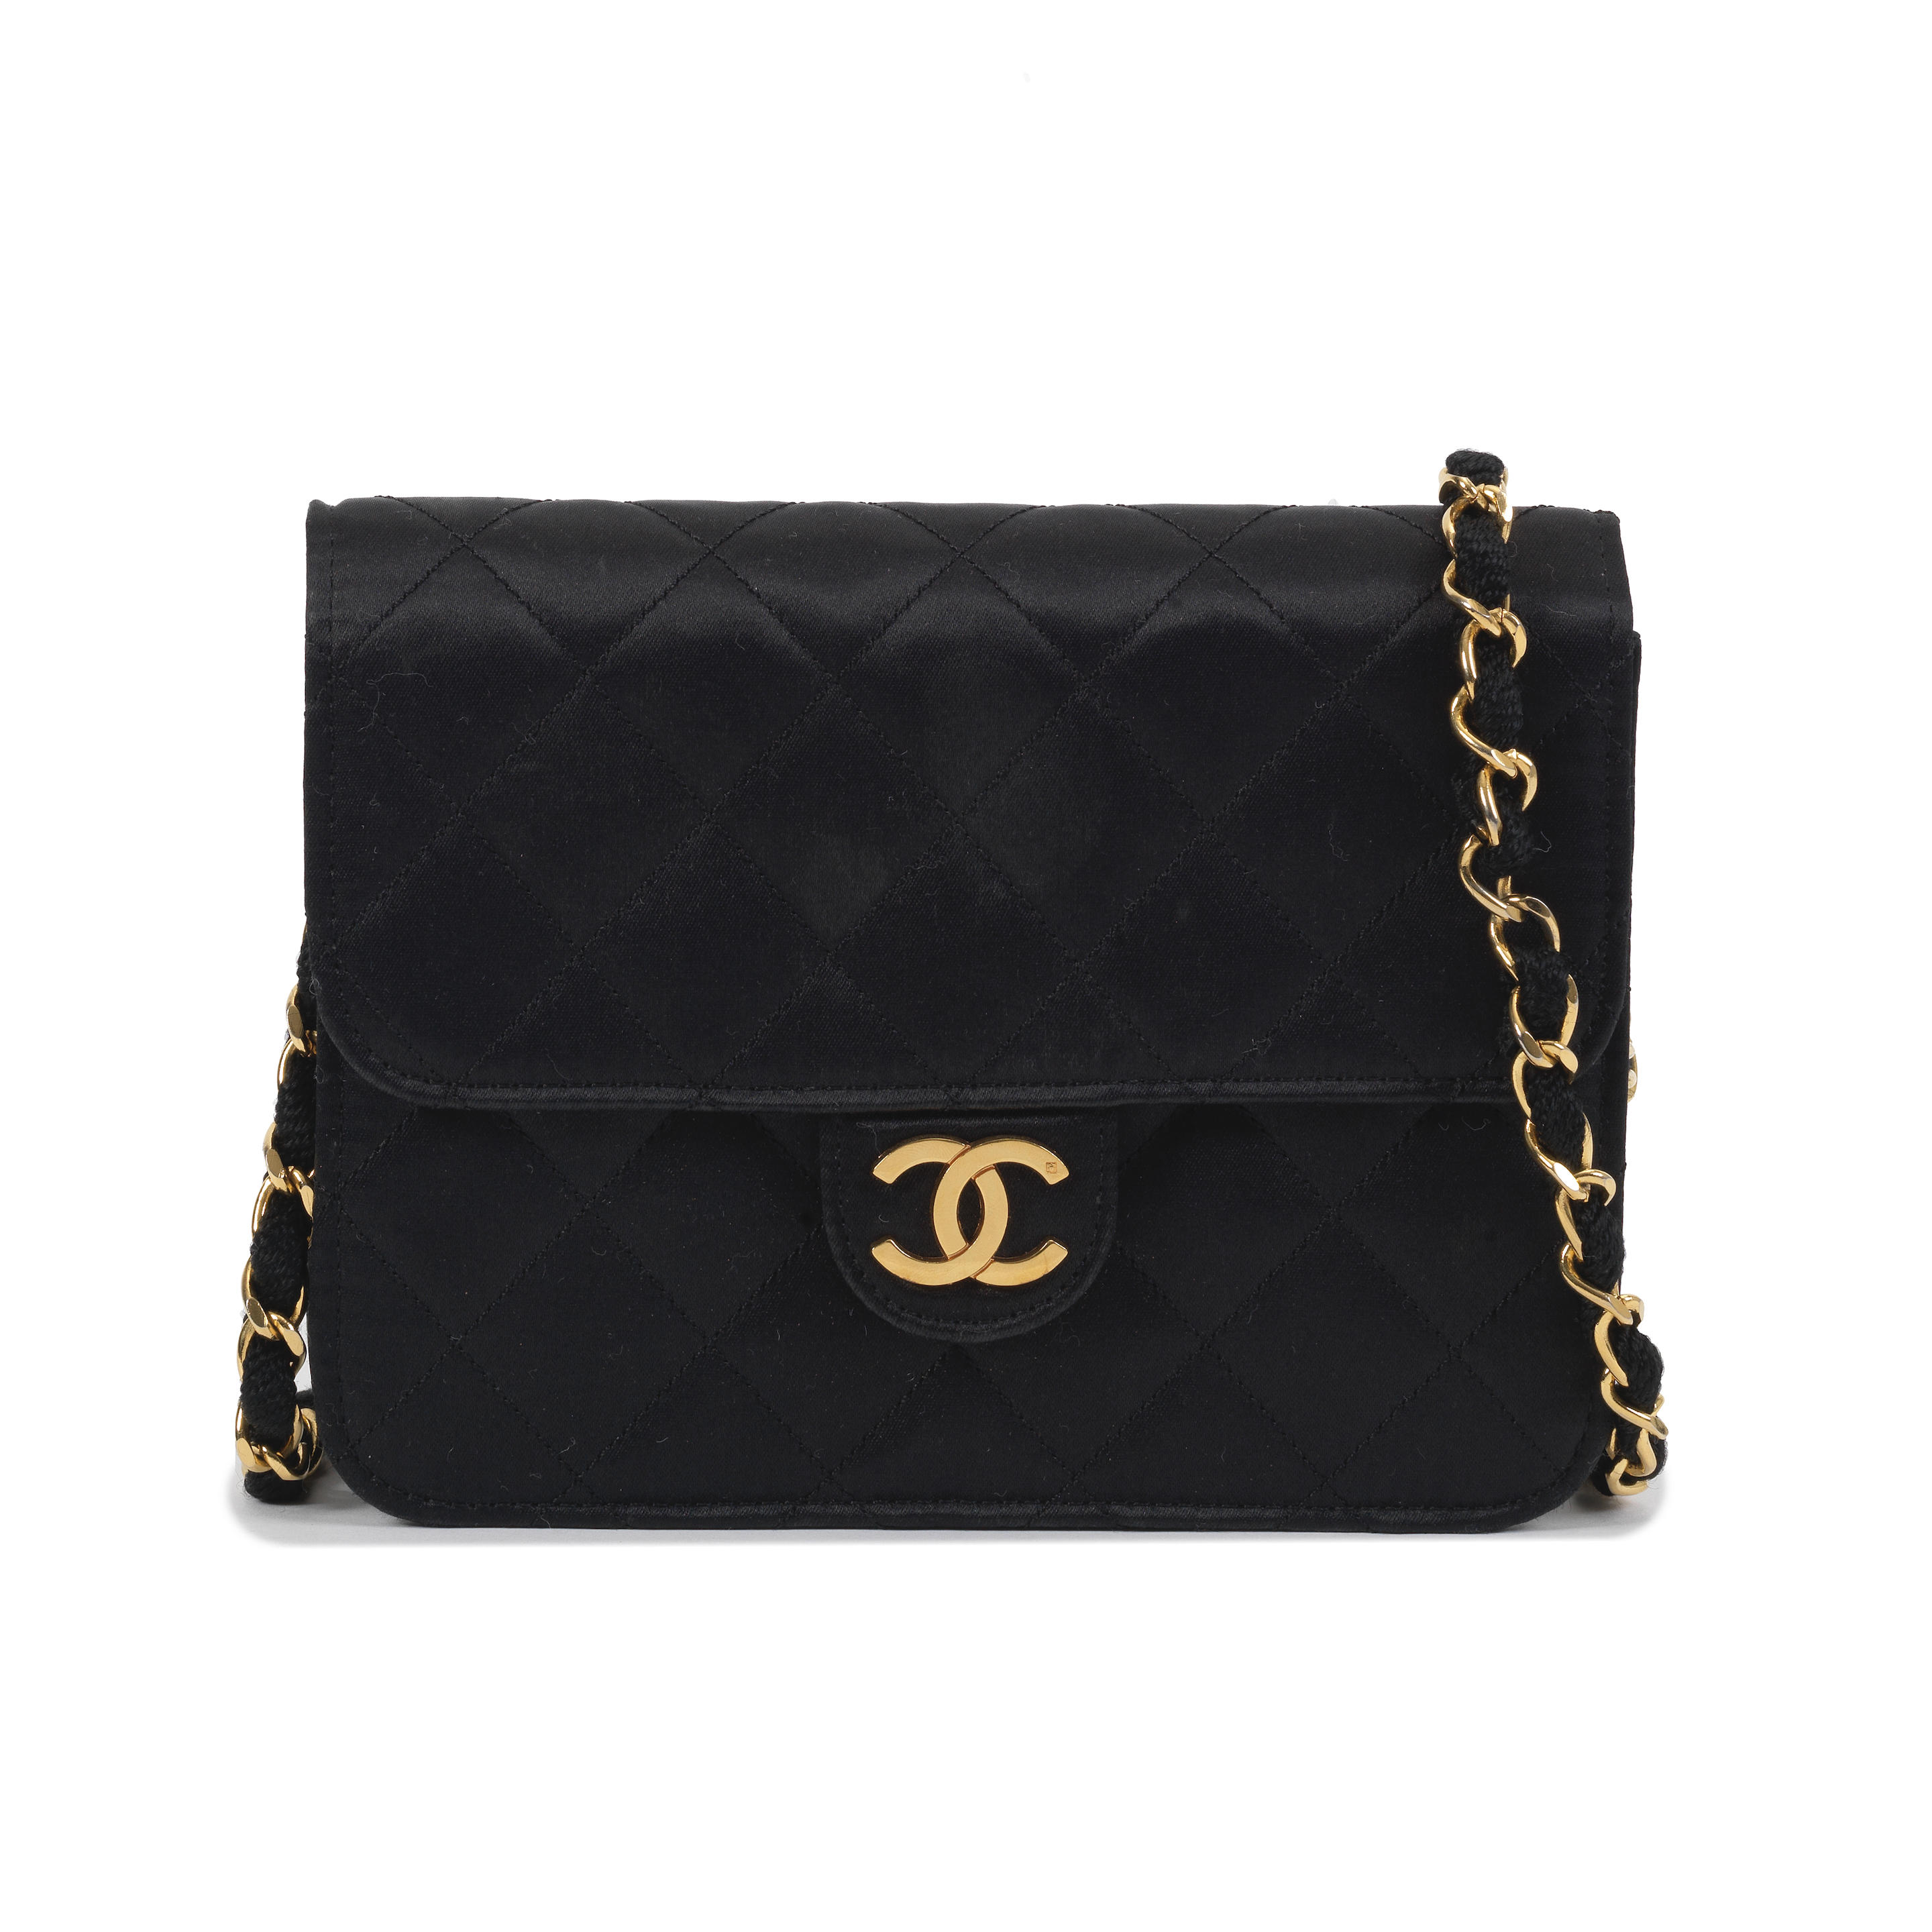 Bonhams : Karl Lagerfeld for Chanel a Patchwork Jumbo Flap Bag Cruise 2011 ( includes serial sticker, authenticity card, booklet, dust bag and box)